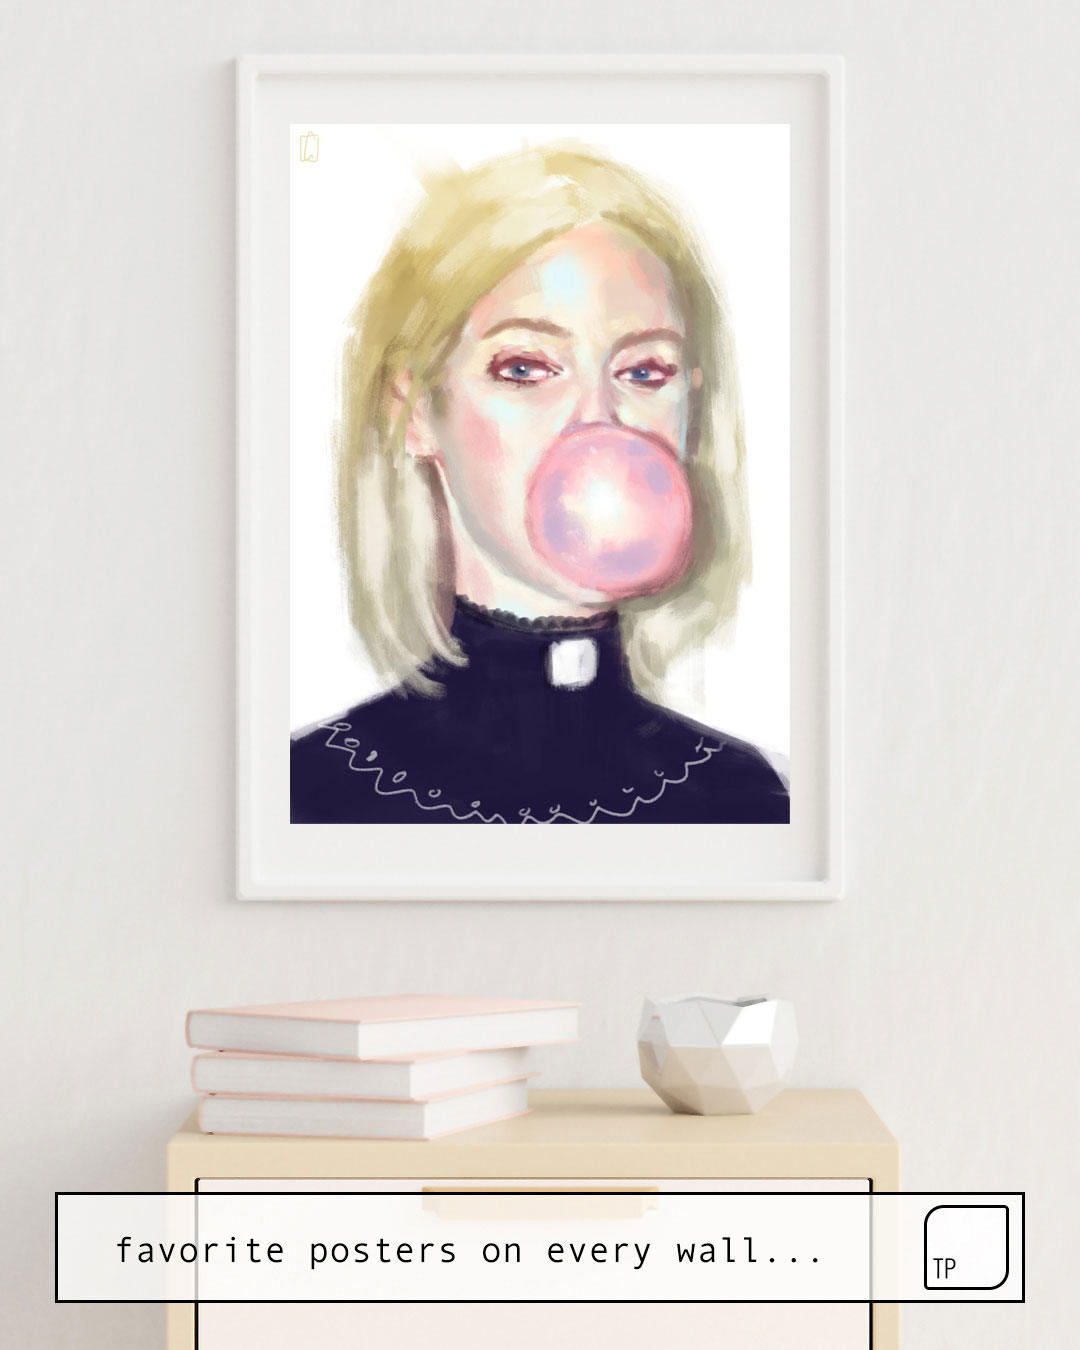 Poster | GIRL IN A BUBBLE by Alexander Grahovsky